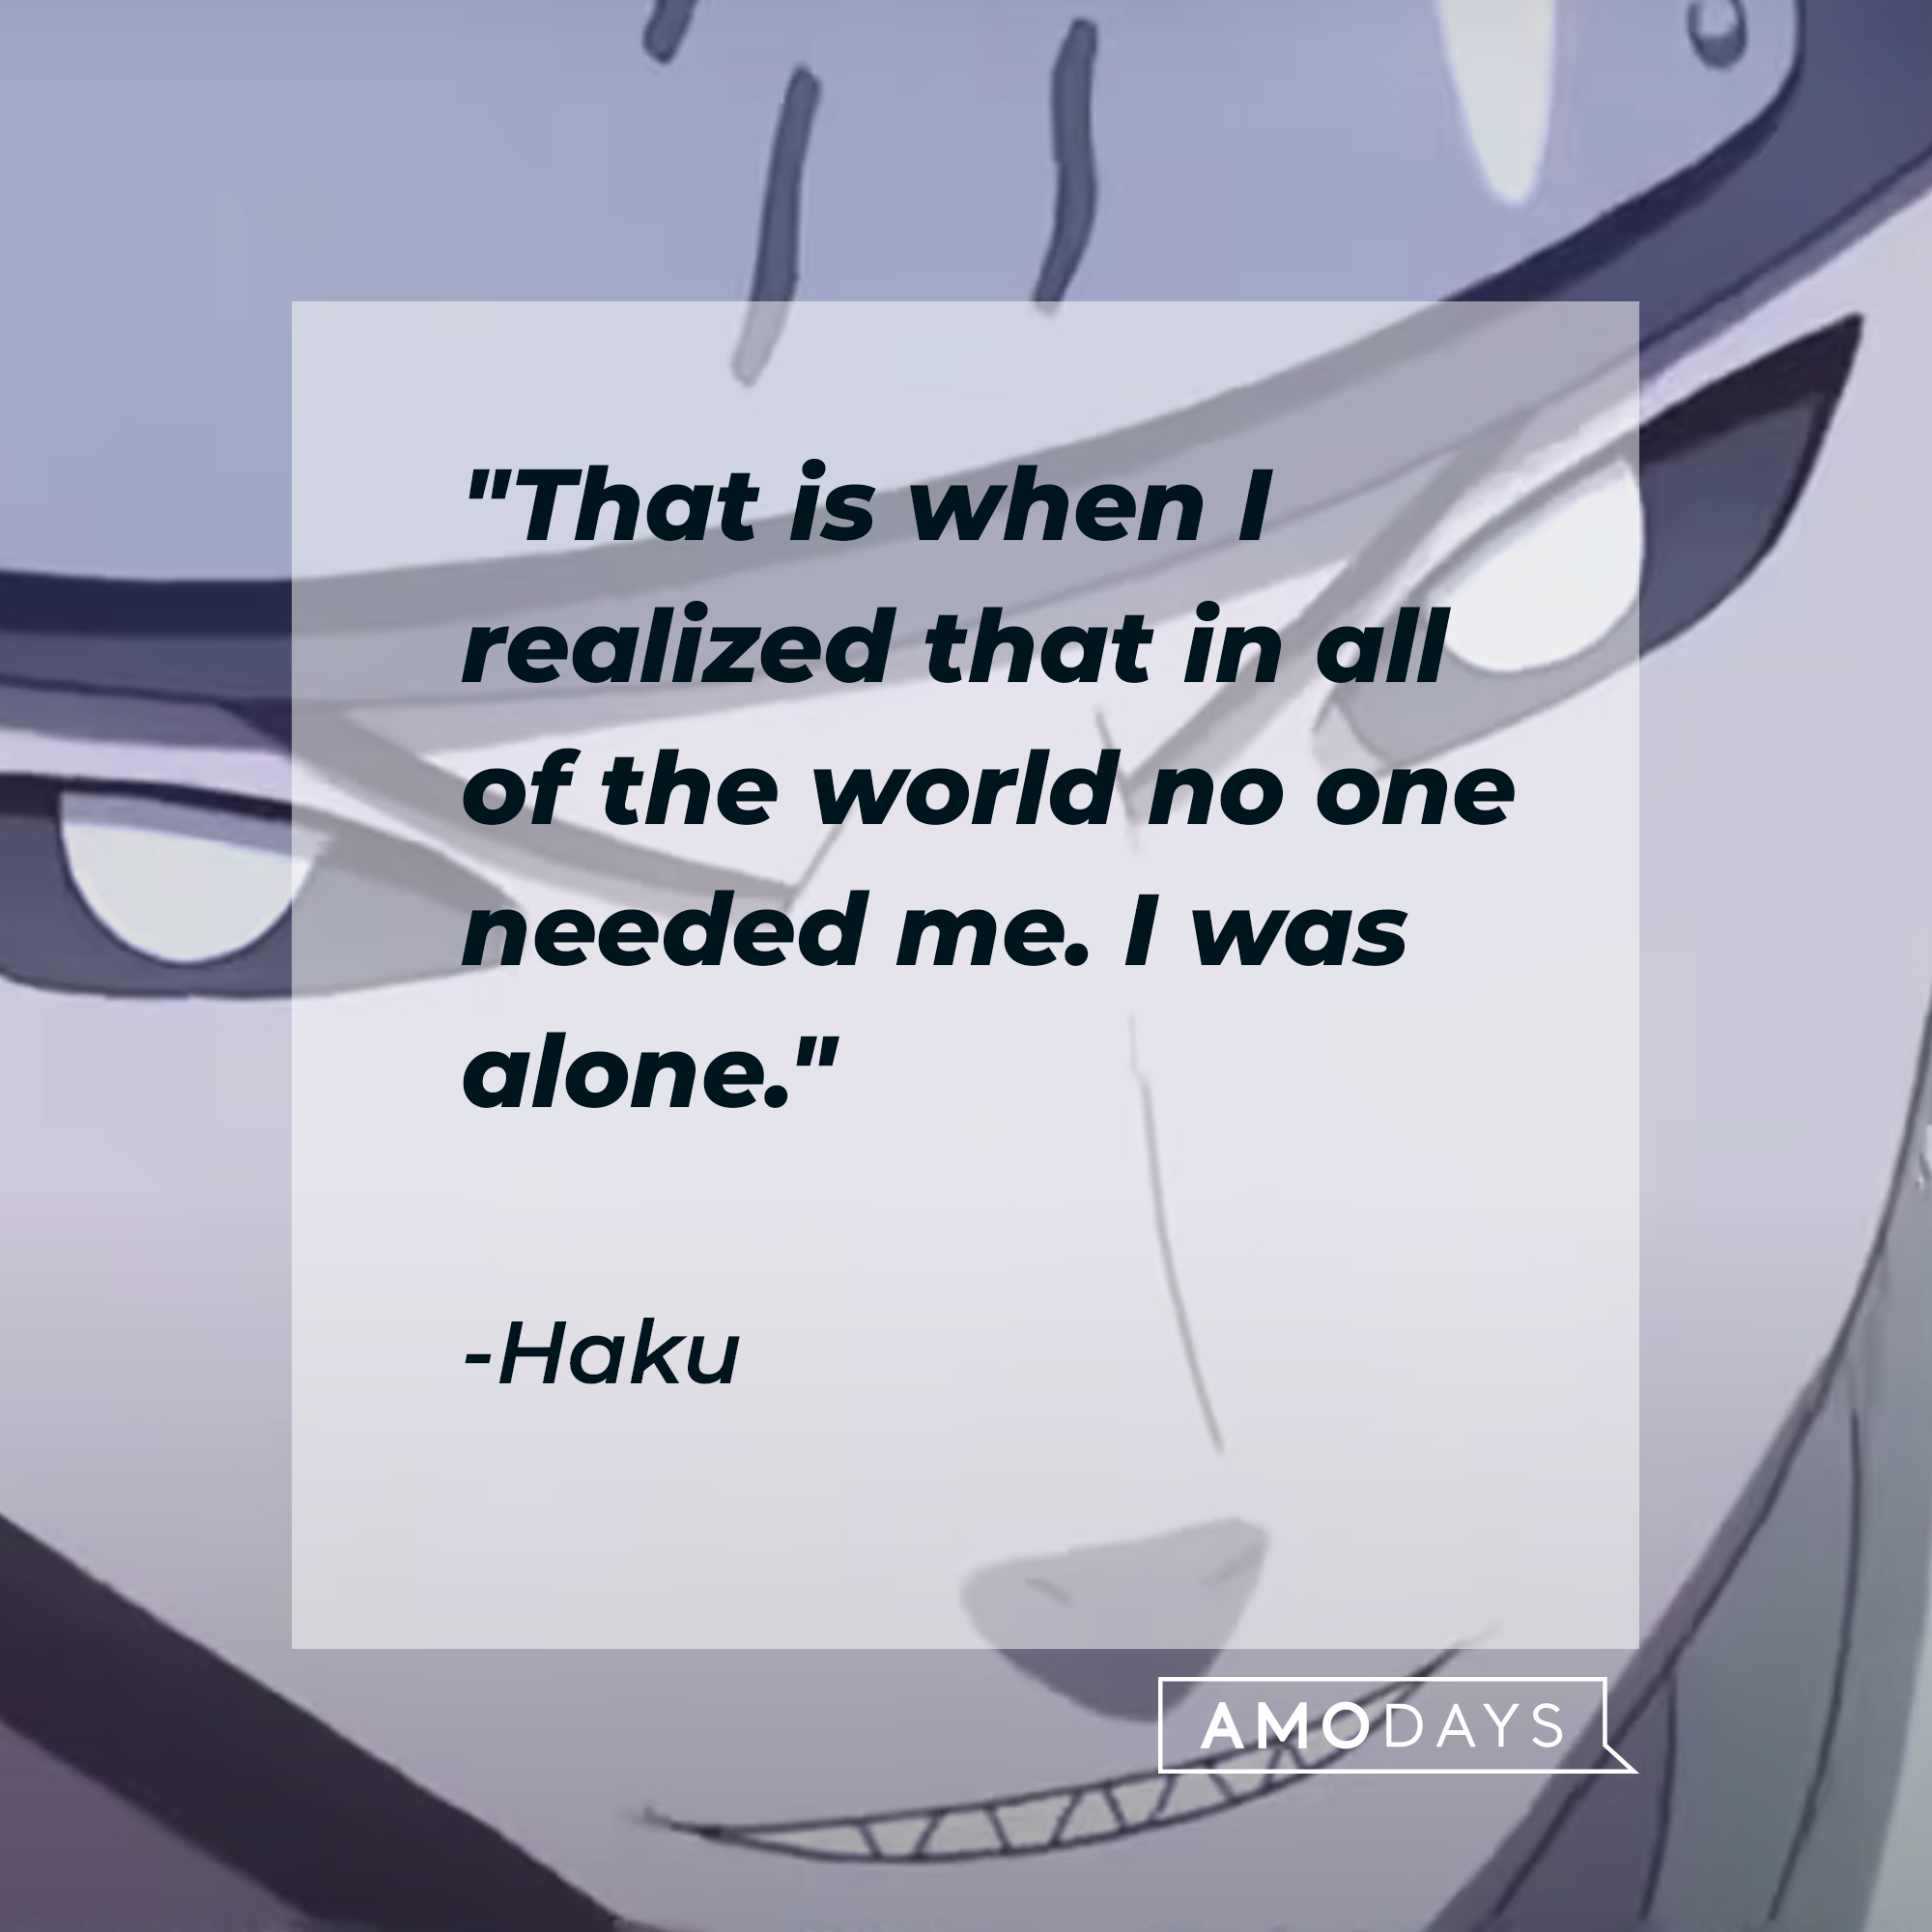 Haku, with his quote: “That is when I realized that in all of the world, no one needed me. I was alone.” | Source: facebook.com/narutoofficialsns